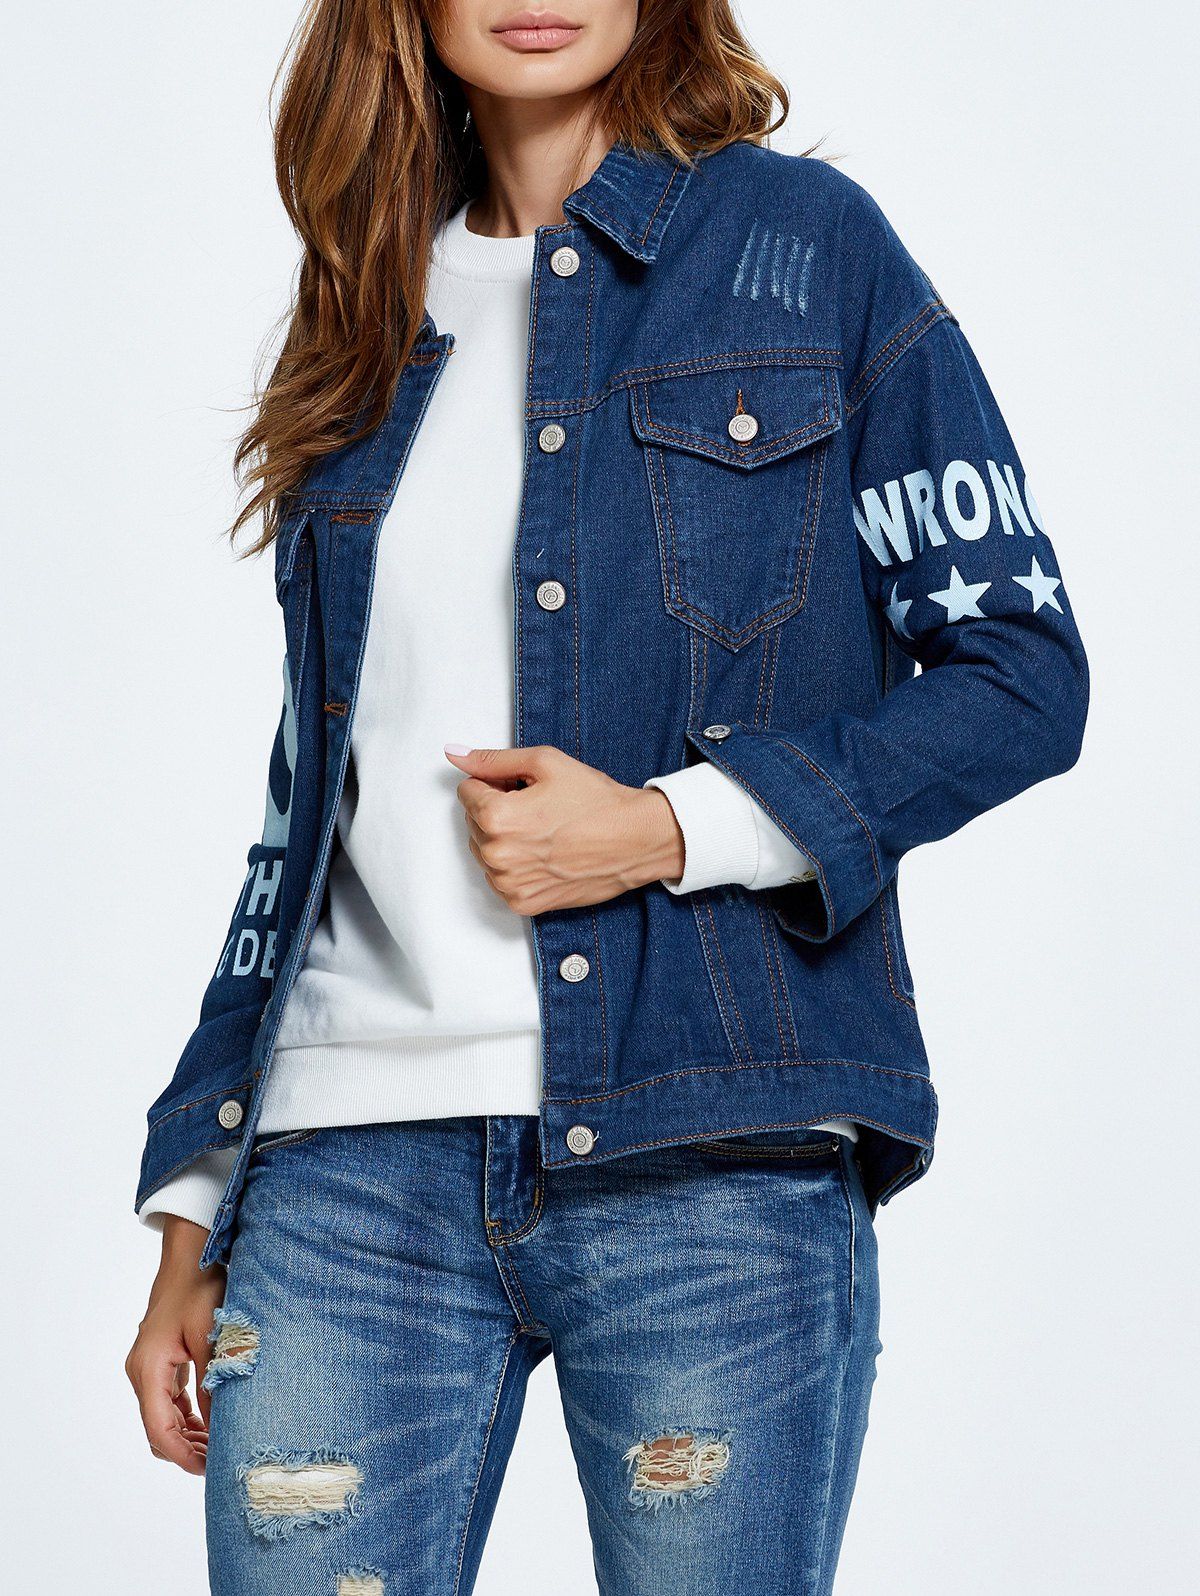 Shops Letter Graphic Button Up Jean Jacket with Sleeves  